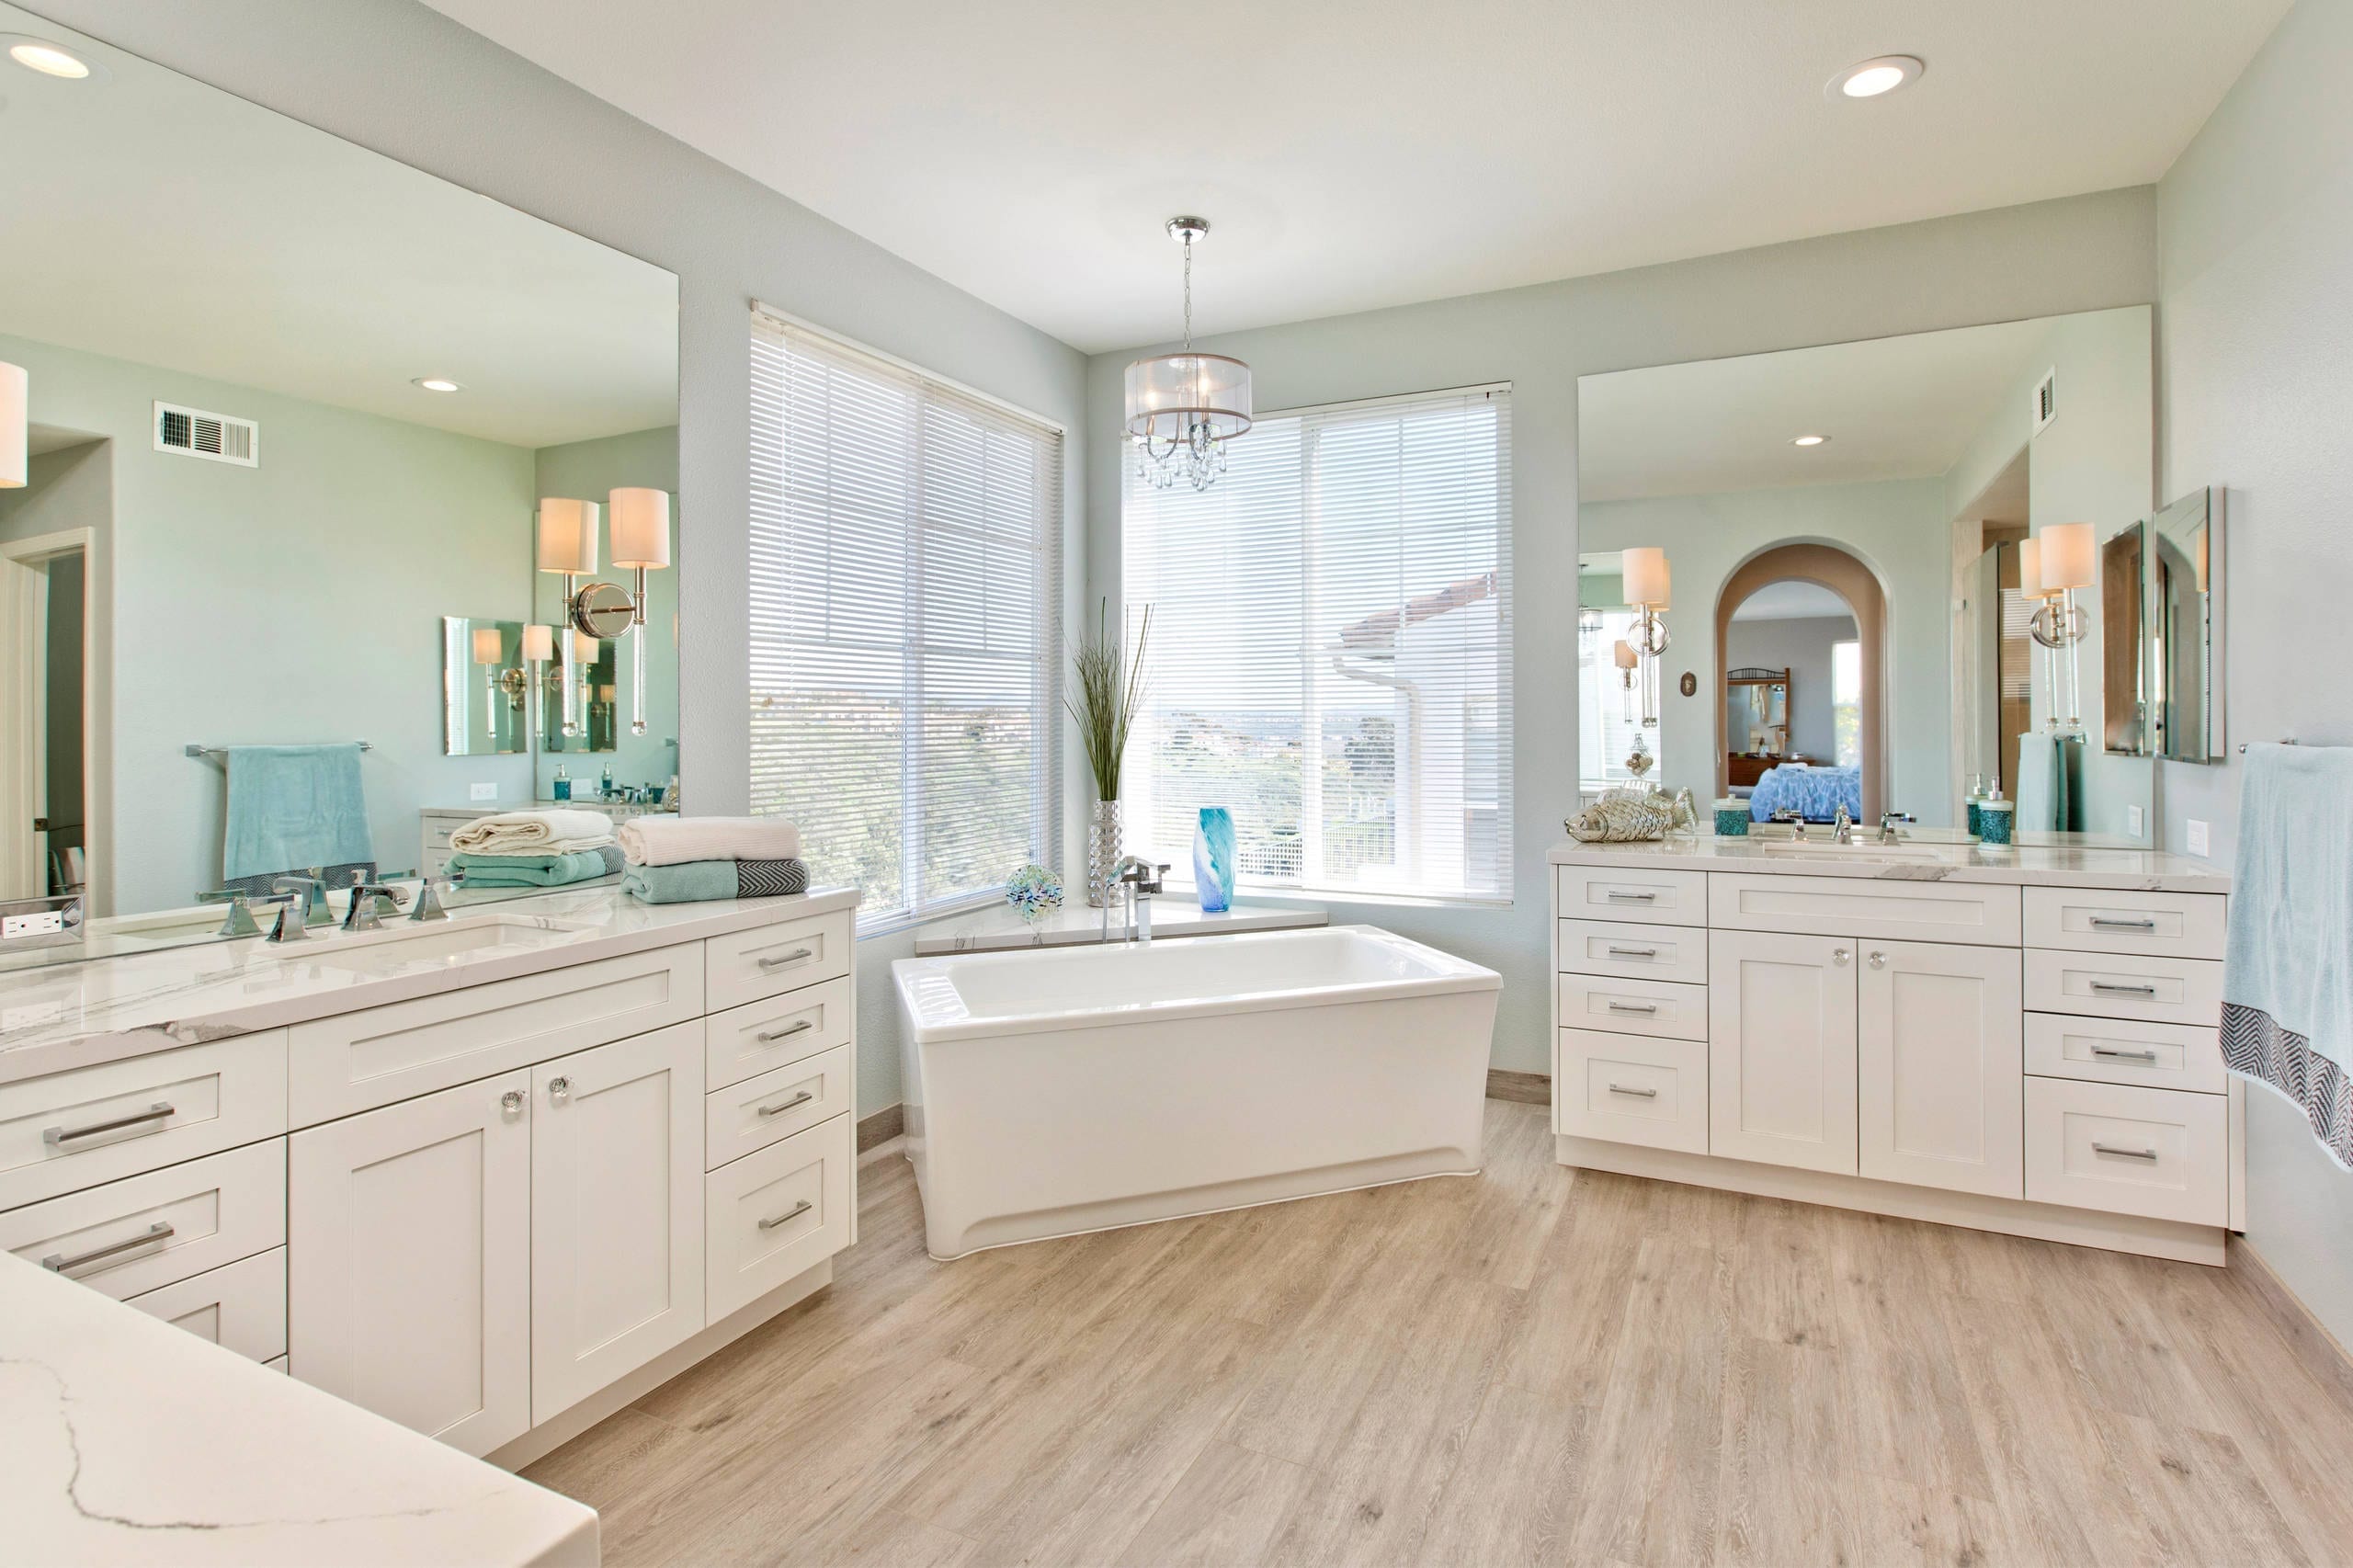 Bathroom cabinets come in various configurations to suit different layout preferences and storage needs.